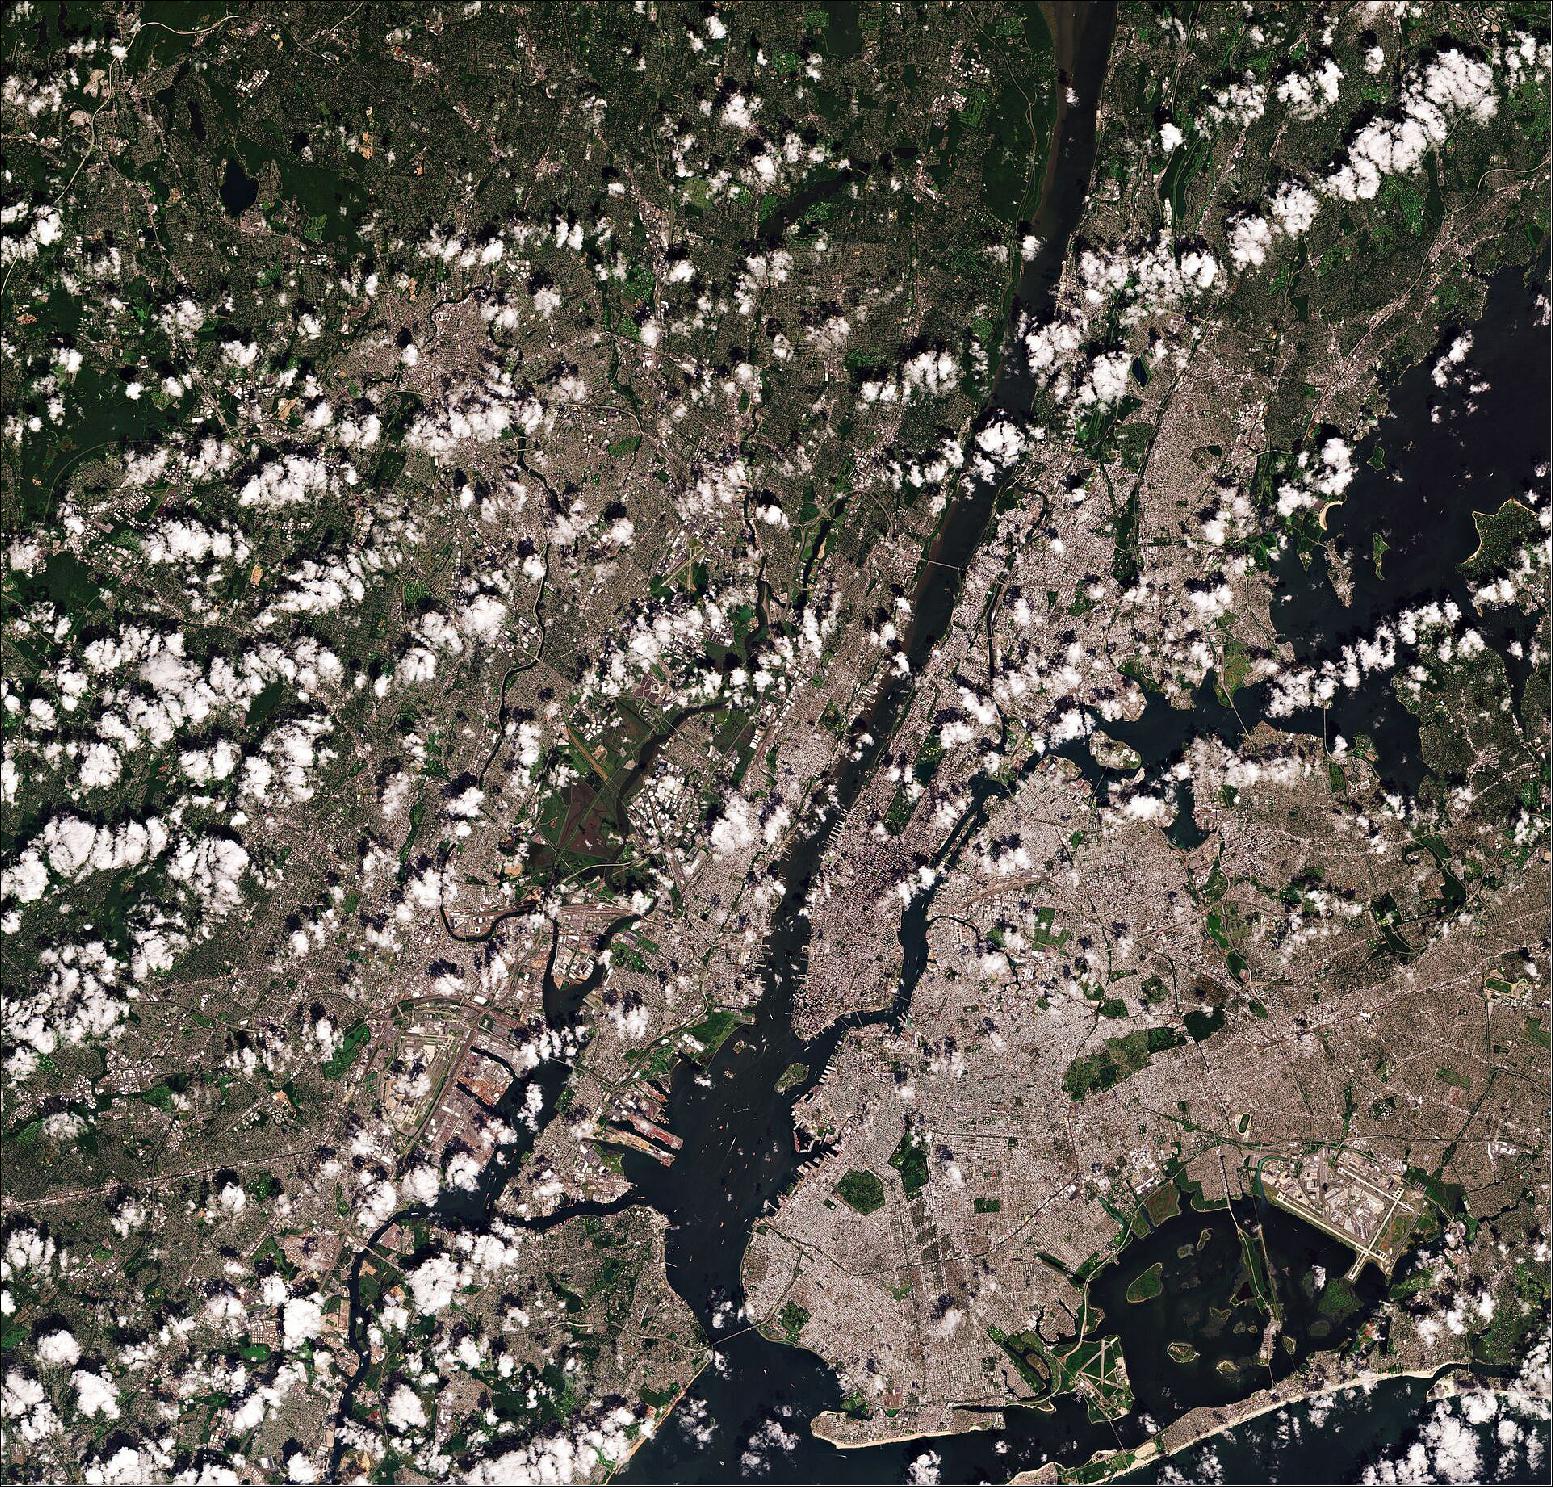 Figure 12: In this image, captured on 26 August 2019, the island of Manhattan is visible in the center, bounded by the Hudson, East and Harlem rivers. In the middle of Manhattan, Central Park can be seen as a long, green rectangle with a large lake in the middle. The Brooklyn and Queens boroughs can be seen on the right. John F. Kennedy International Airport – the busiest international air passenger gateway into North America – can easily be identifiable in the lower right of the image. The Bronx is visible north of Manhattan, while Staten Island can be seen in the lower left of the image. New Jersey dominates the upper left side of the image. This image is also featured on the Earth from Space video program (image credit: ESA, the image contains modified Copernicus Sentinel data (2019), processed by ESA, CC BY-SA 3.0 IGO)